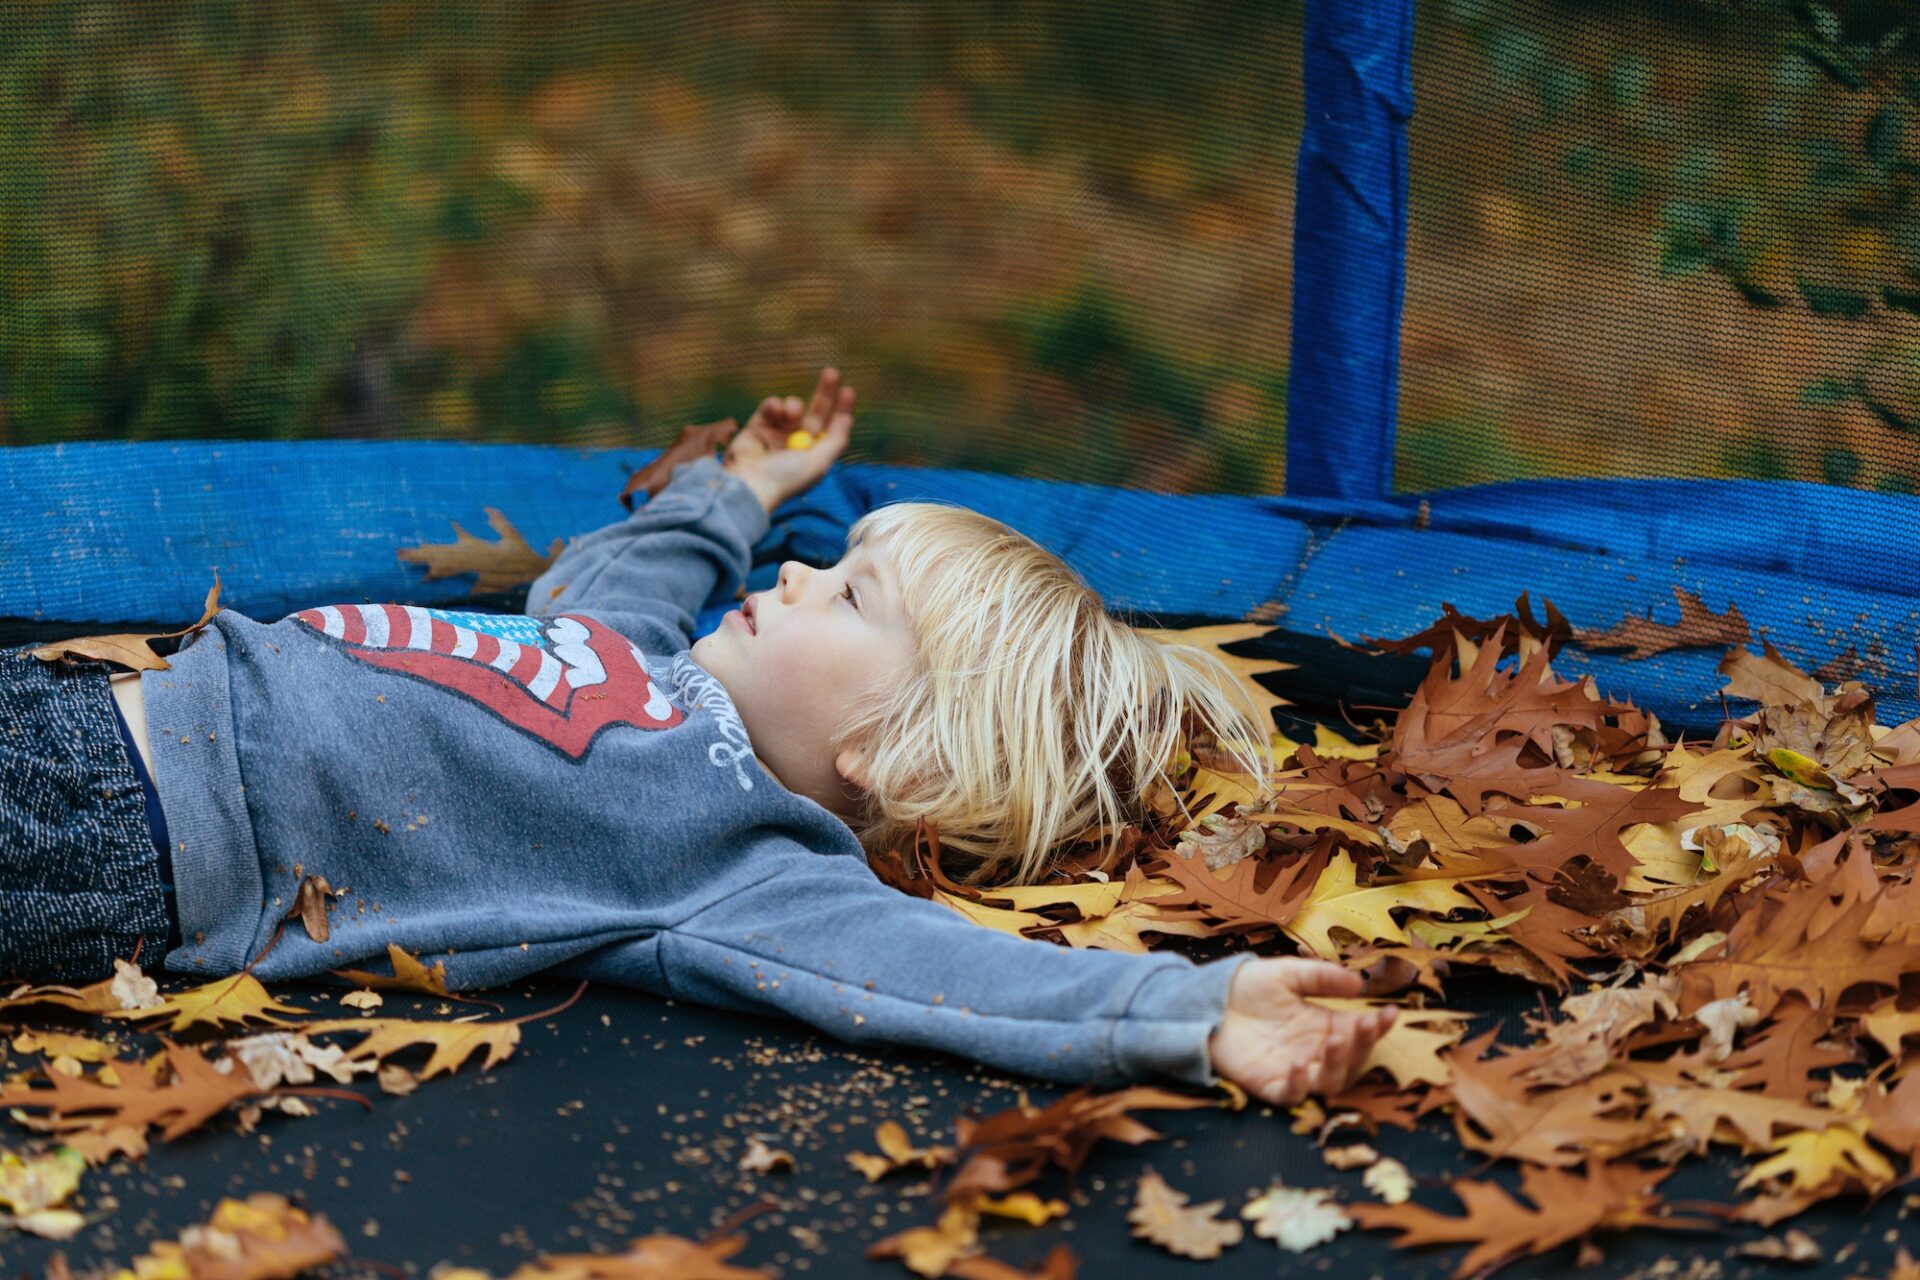 the boy lies on a trampoline among the leaves